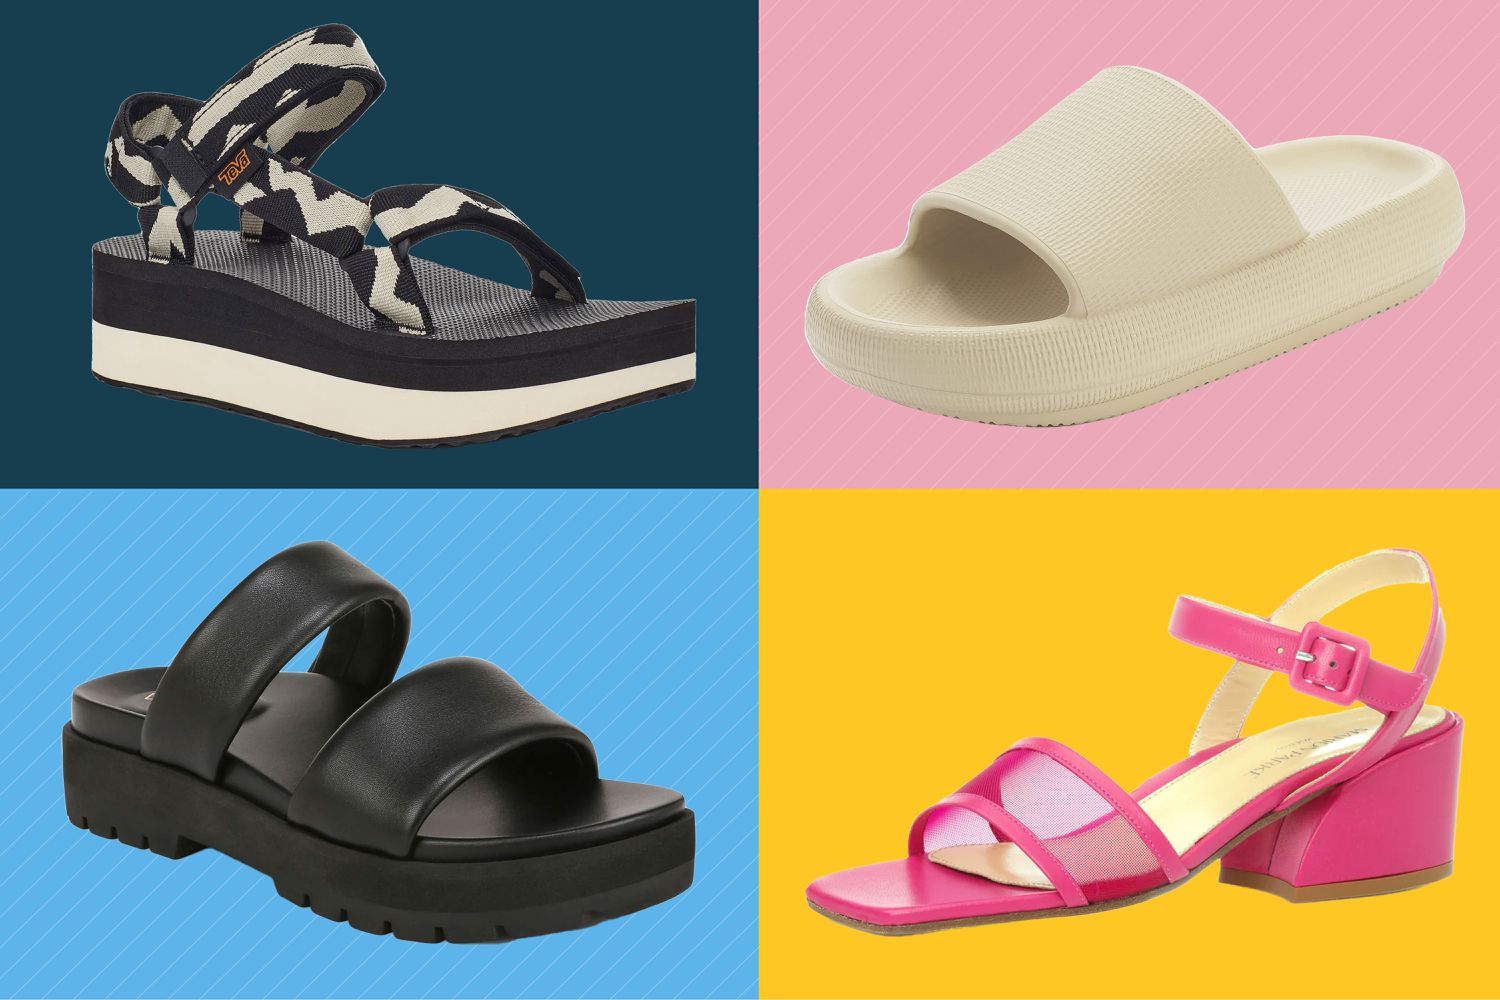 Which Sandal Is More Comfortable?